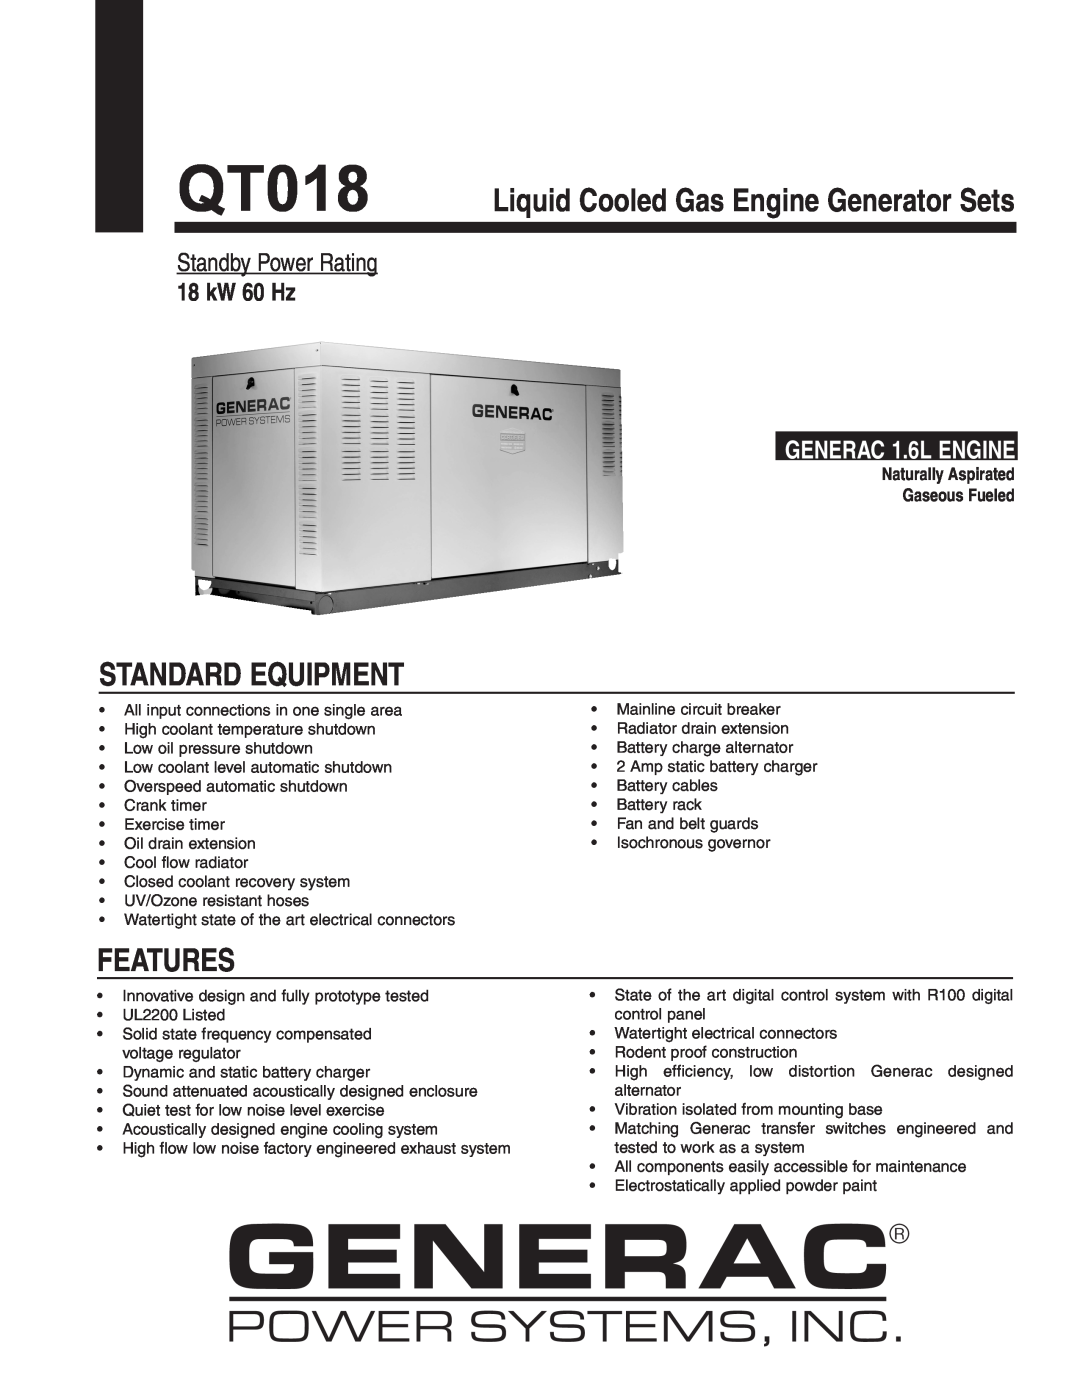 Generac Power Systems QT018 manual Liquid Cooled Gas Engine Generator Sets, Standby Power Rating, 18 kW 60 Hz 